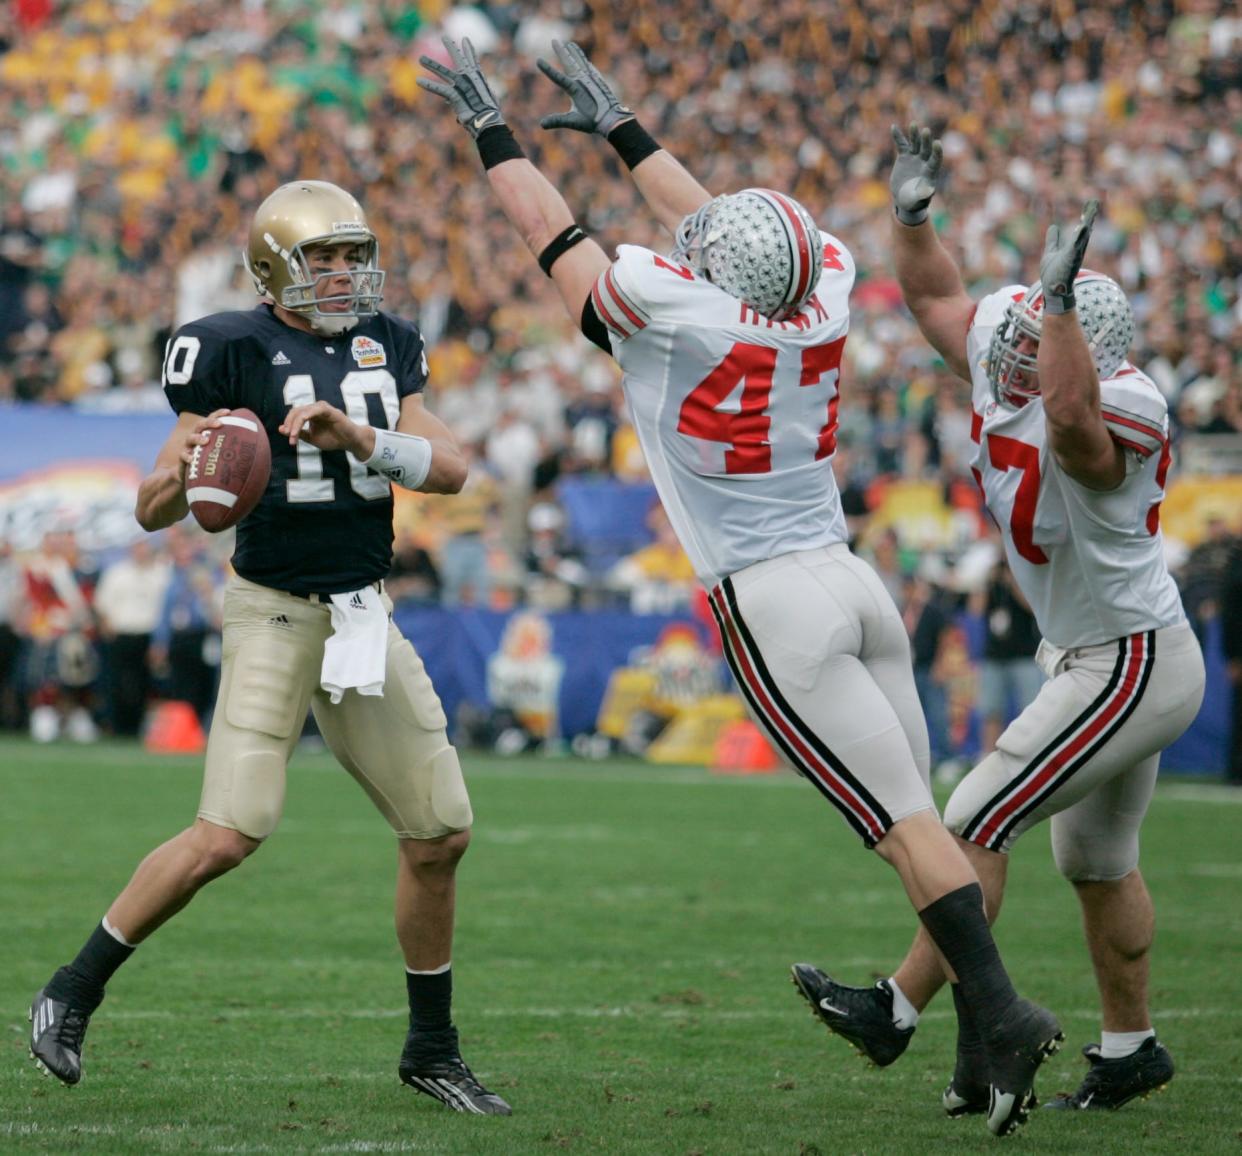 Dublin Coffman graduate Brady Quinn played quarterback at Notre Dame before being drafted by the Cleveland Browns.